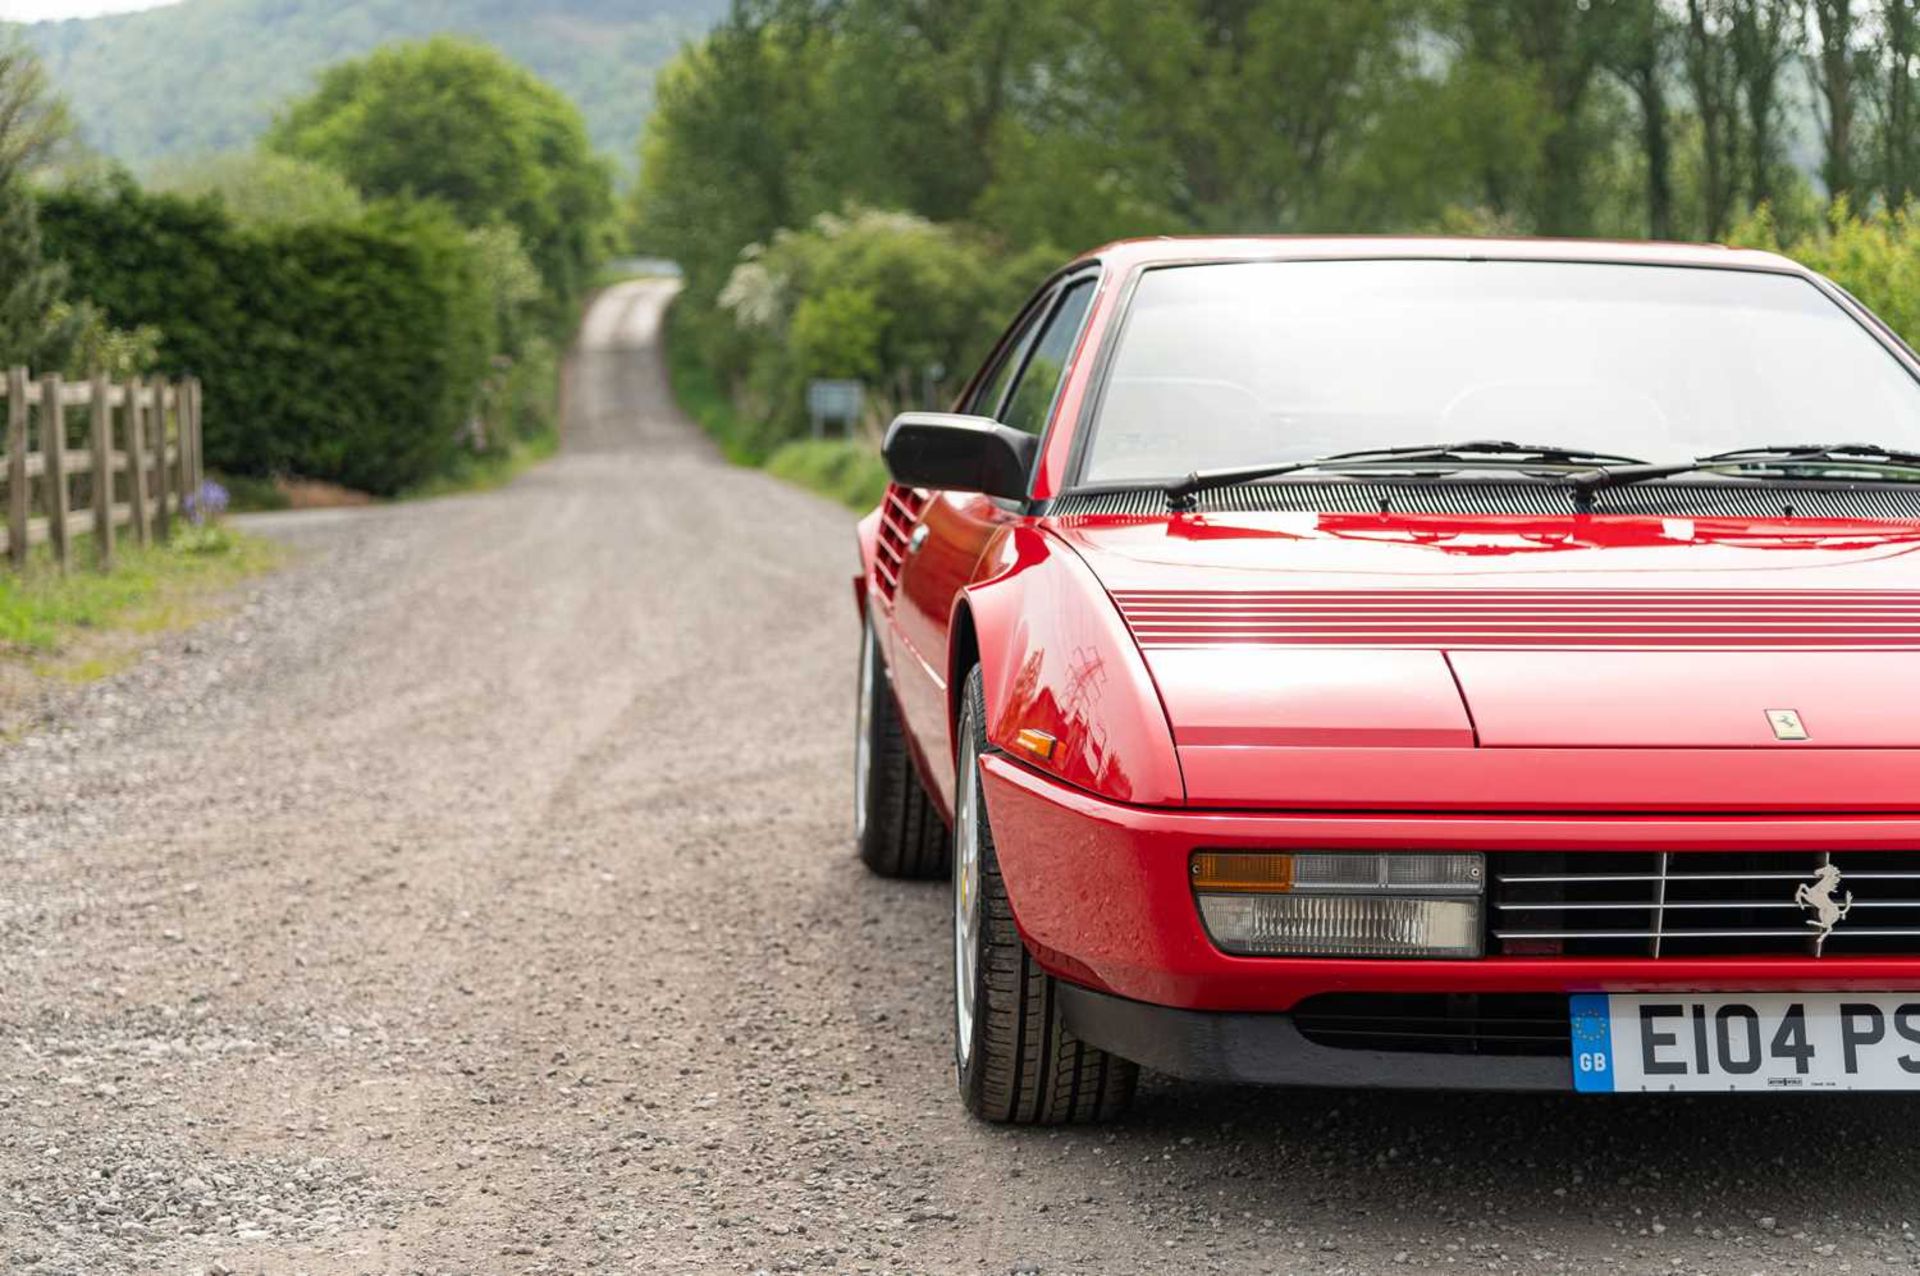 1988 Ferrari Mondial QV ***NO RESERVE*** Remained in the same ownership for nearly two decades finis - Image 16 of 91